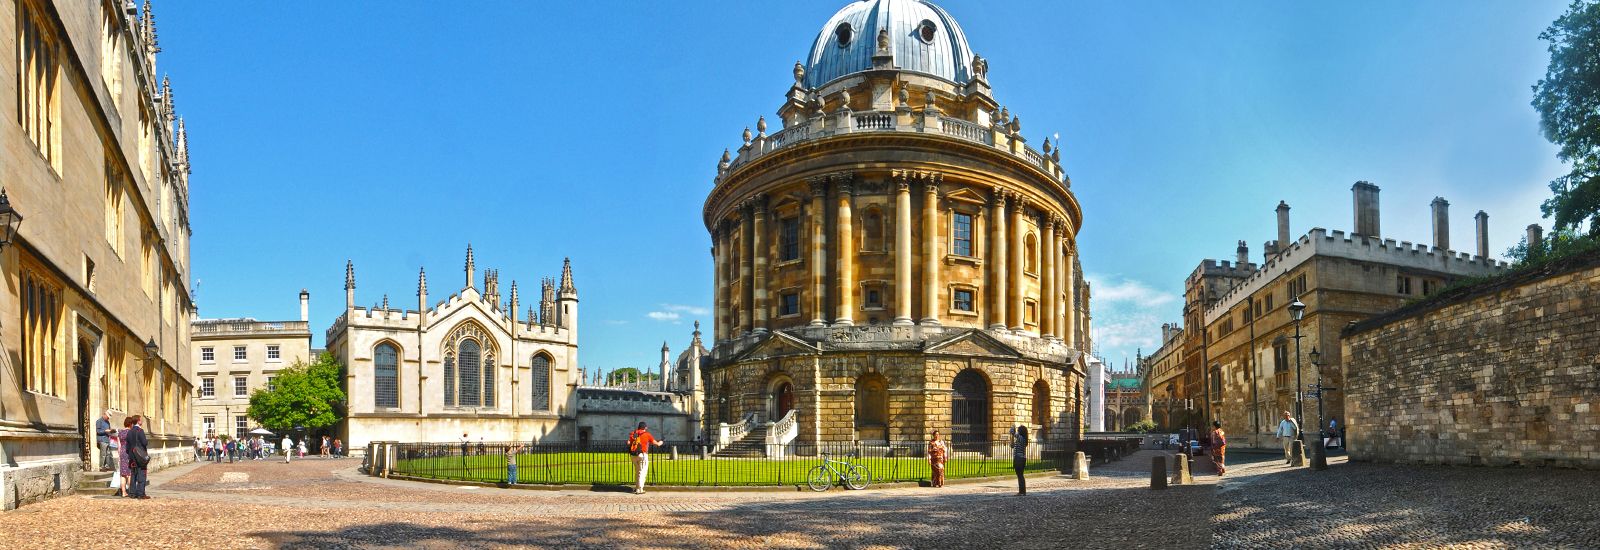 Photo of University for natural science in UK- University of Oxford